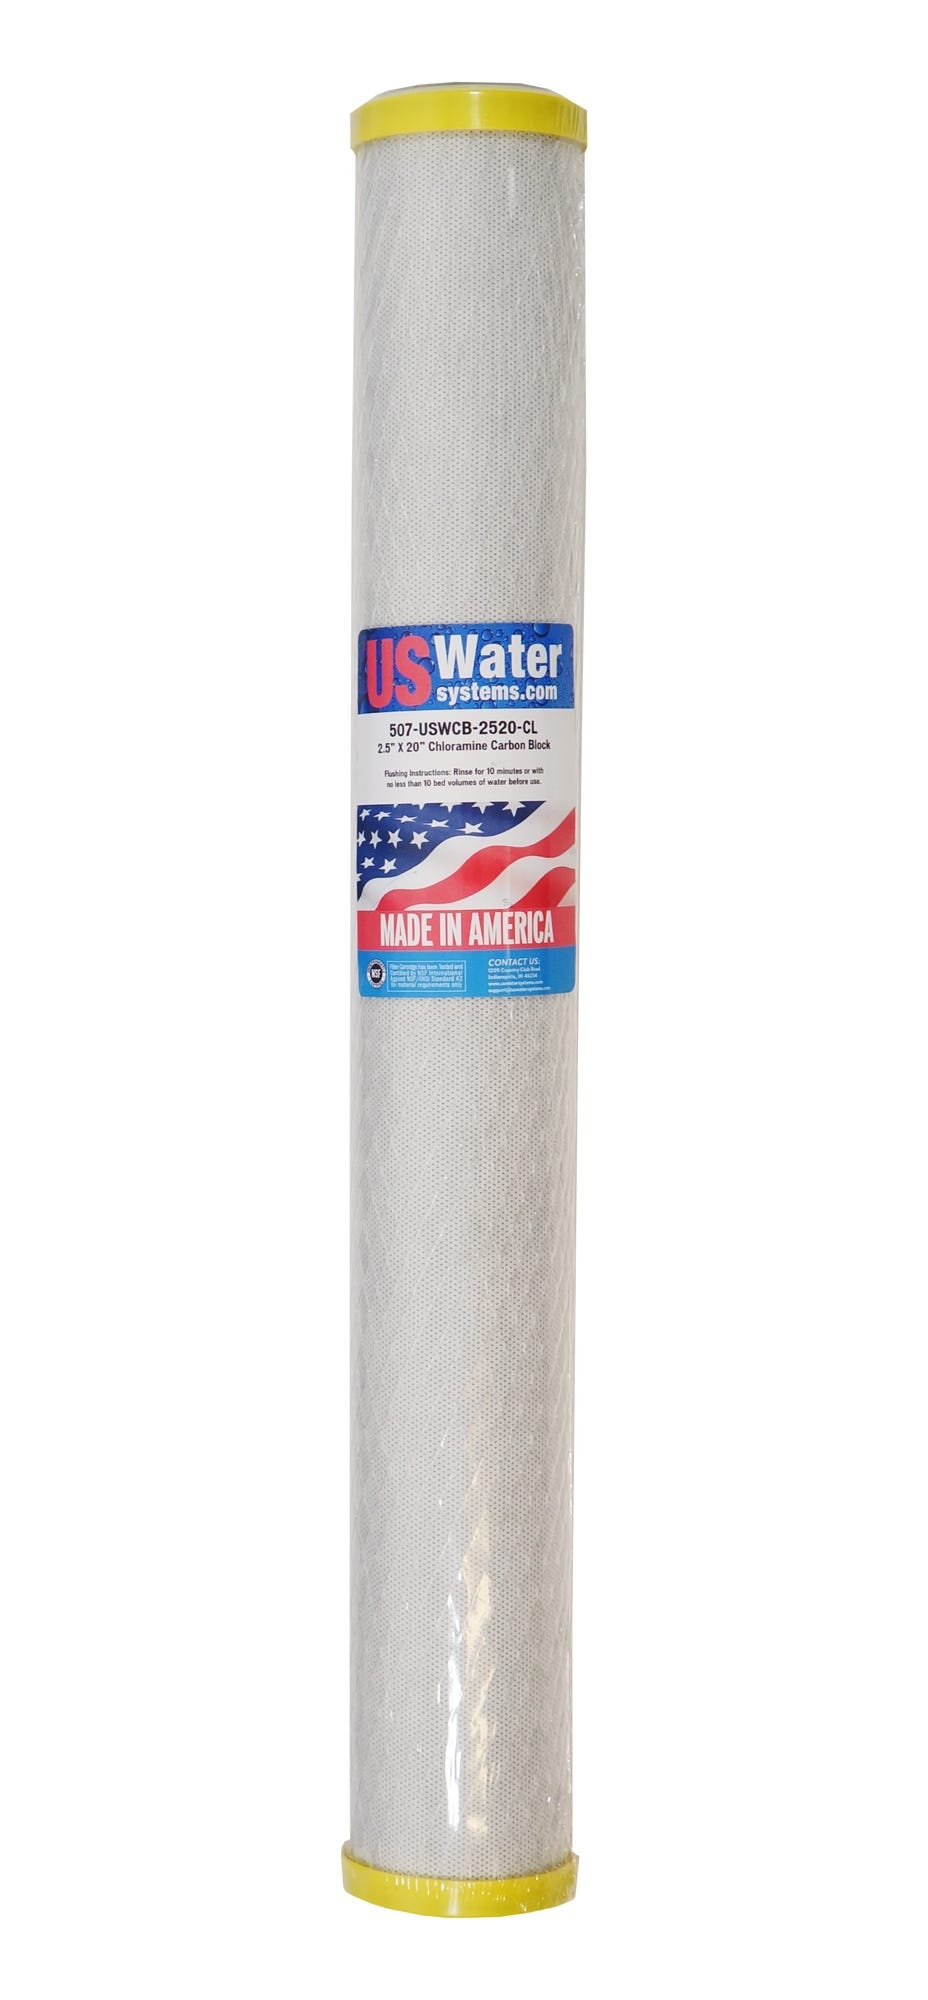 US Water Chloramine Carbon Block Filter | USWCB-2520-CL